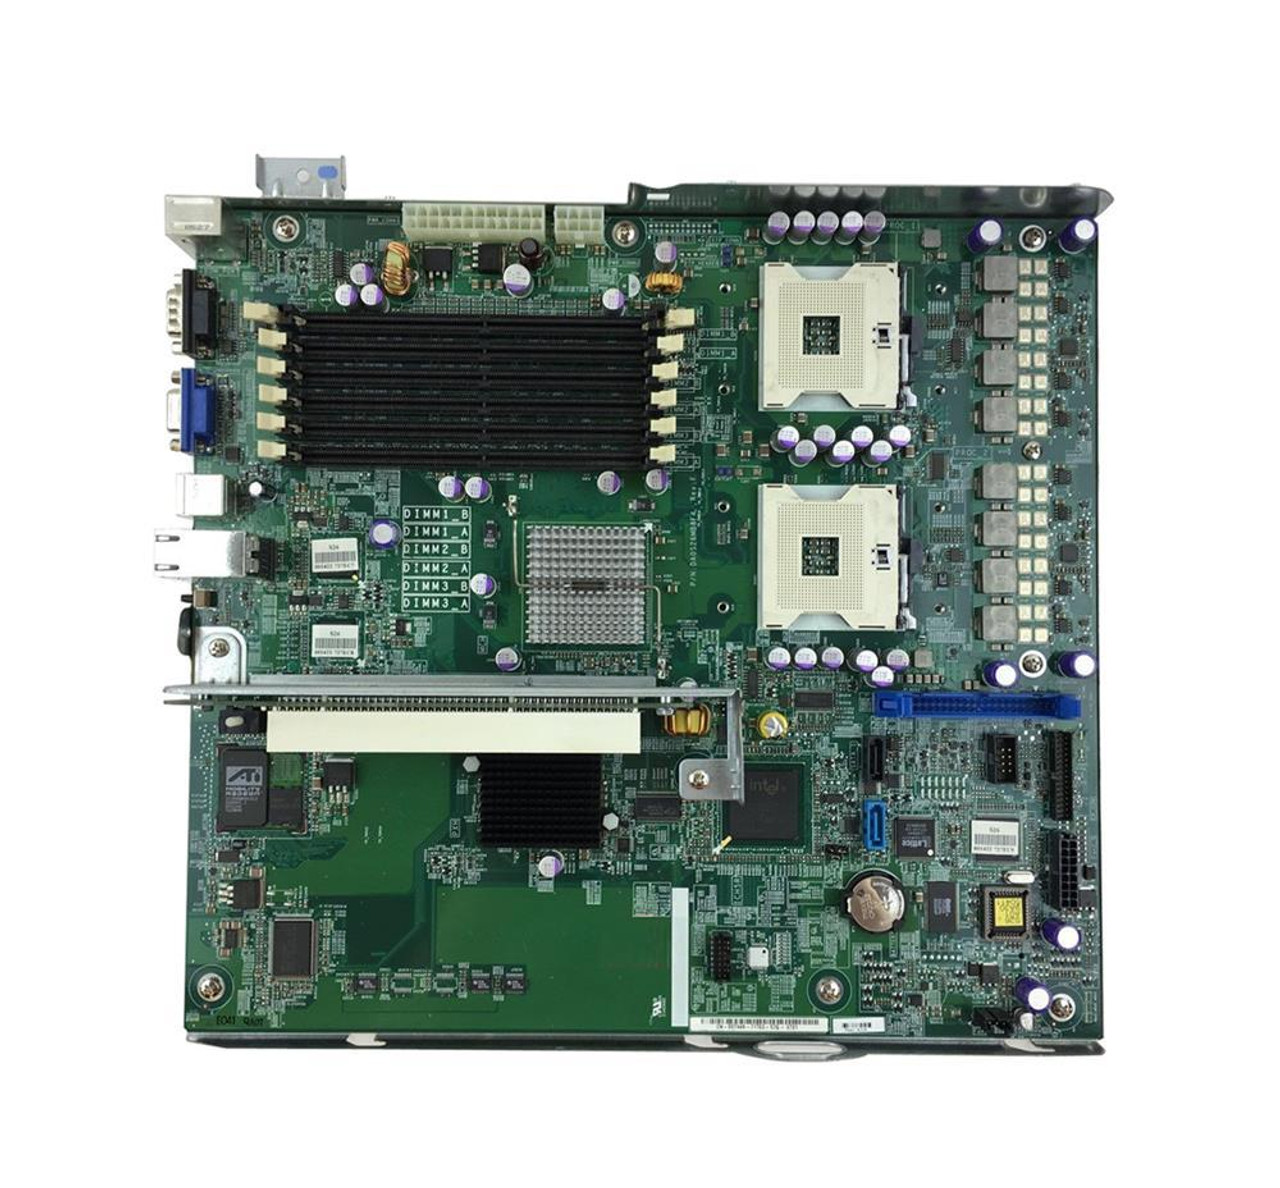 0MJ137 Dell System Board (Motherboard) with Tray for PowerEdge SC1425 Server (Refurbished)